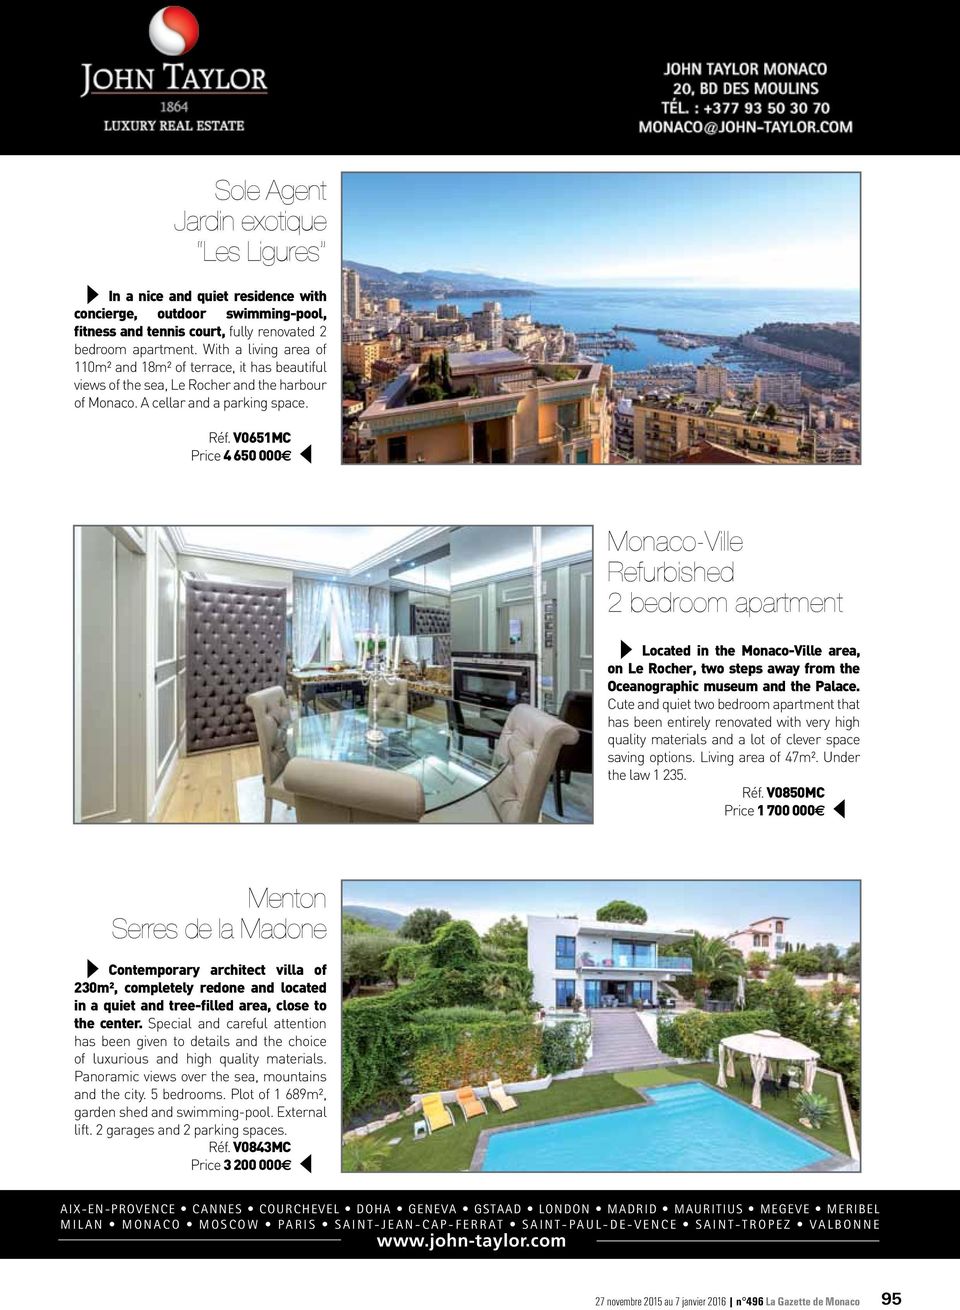 V0651MC Price 4 650 000 Monaco-Ville Refurbished 2 bedroom apartment Located in the Monaco-Ville area, on Le Rocher, two steps away from the Oceanographic museum and the Palace.